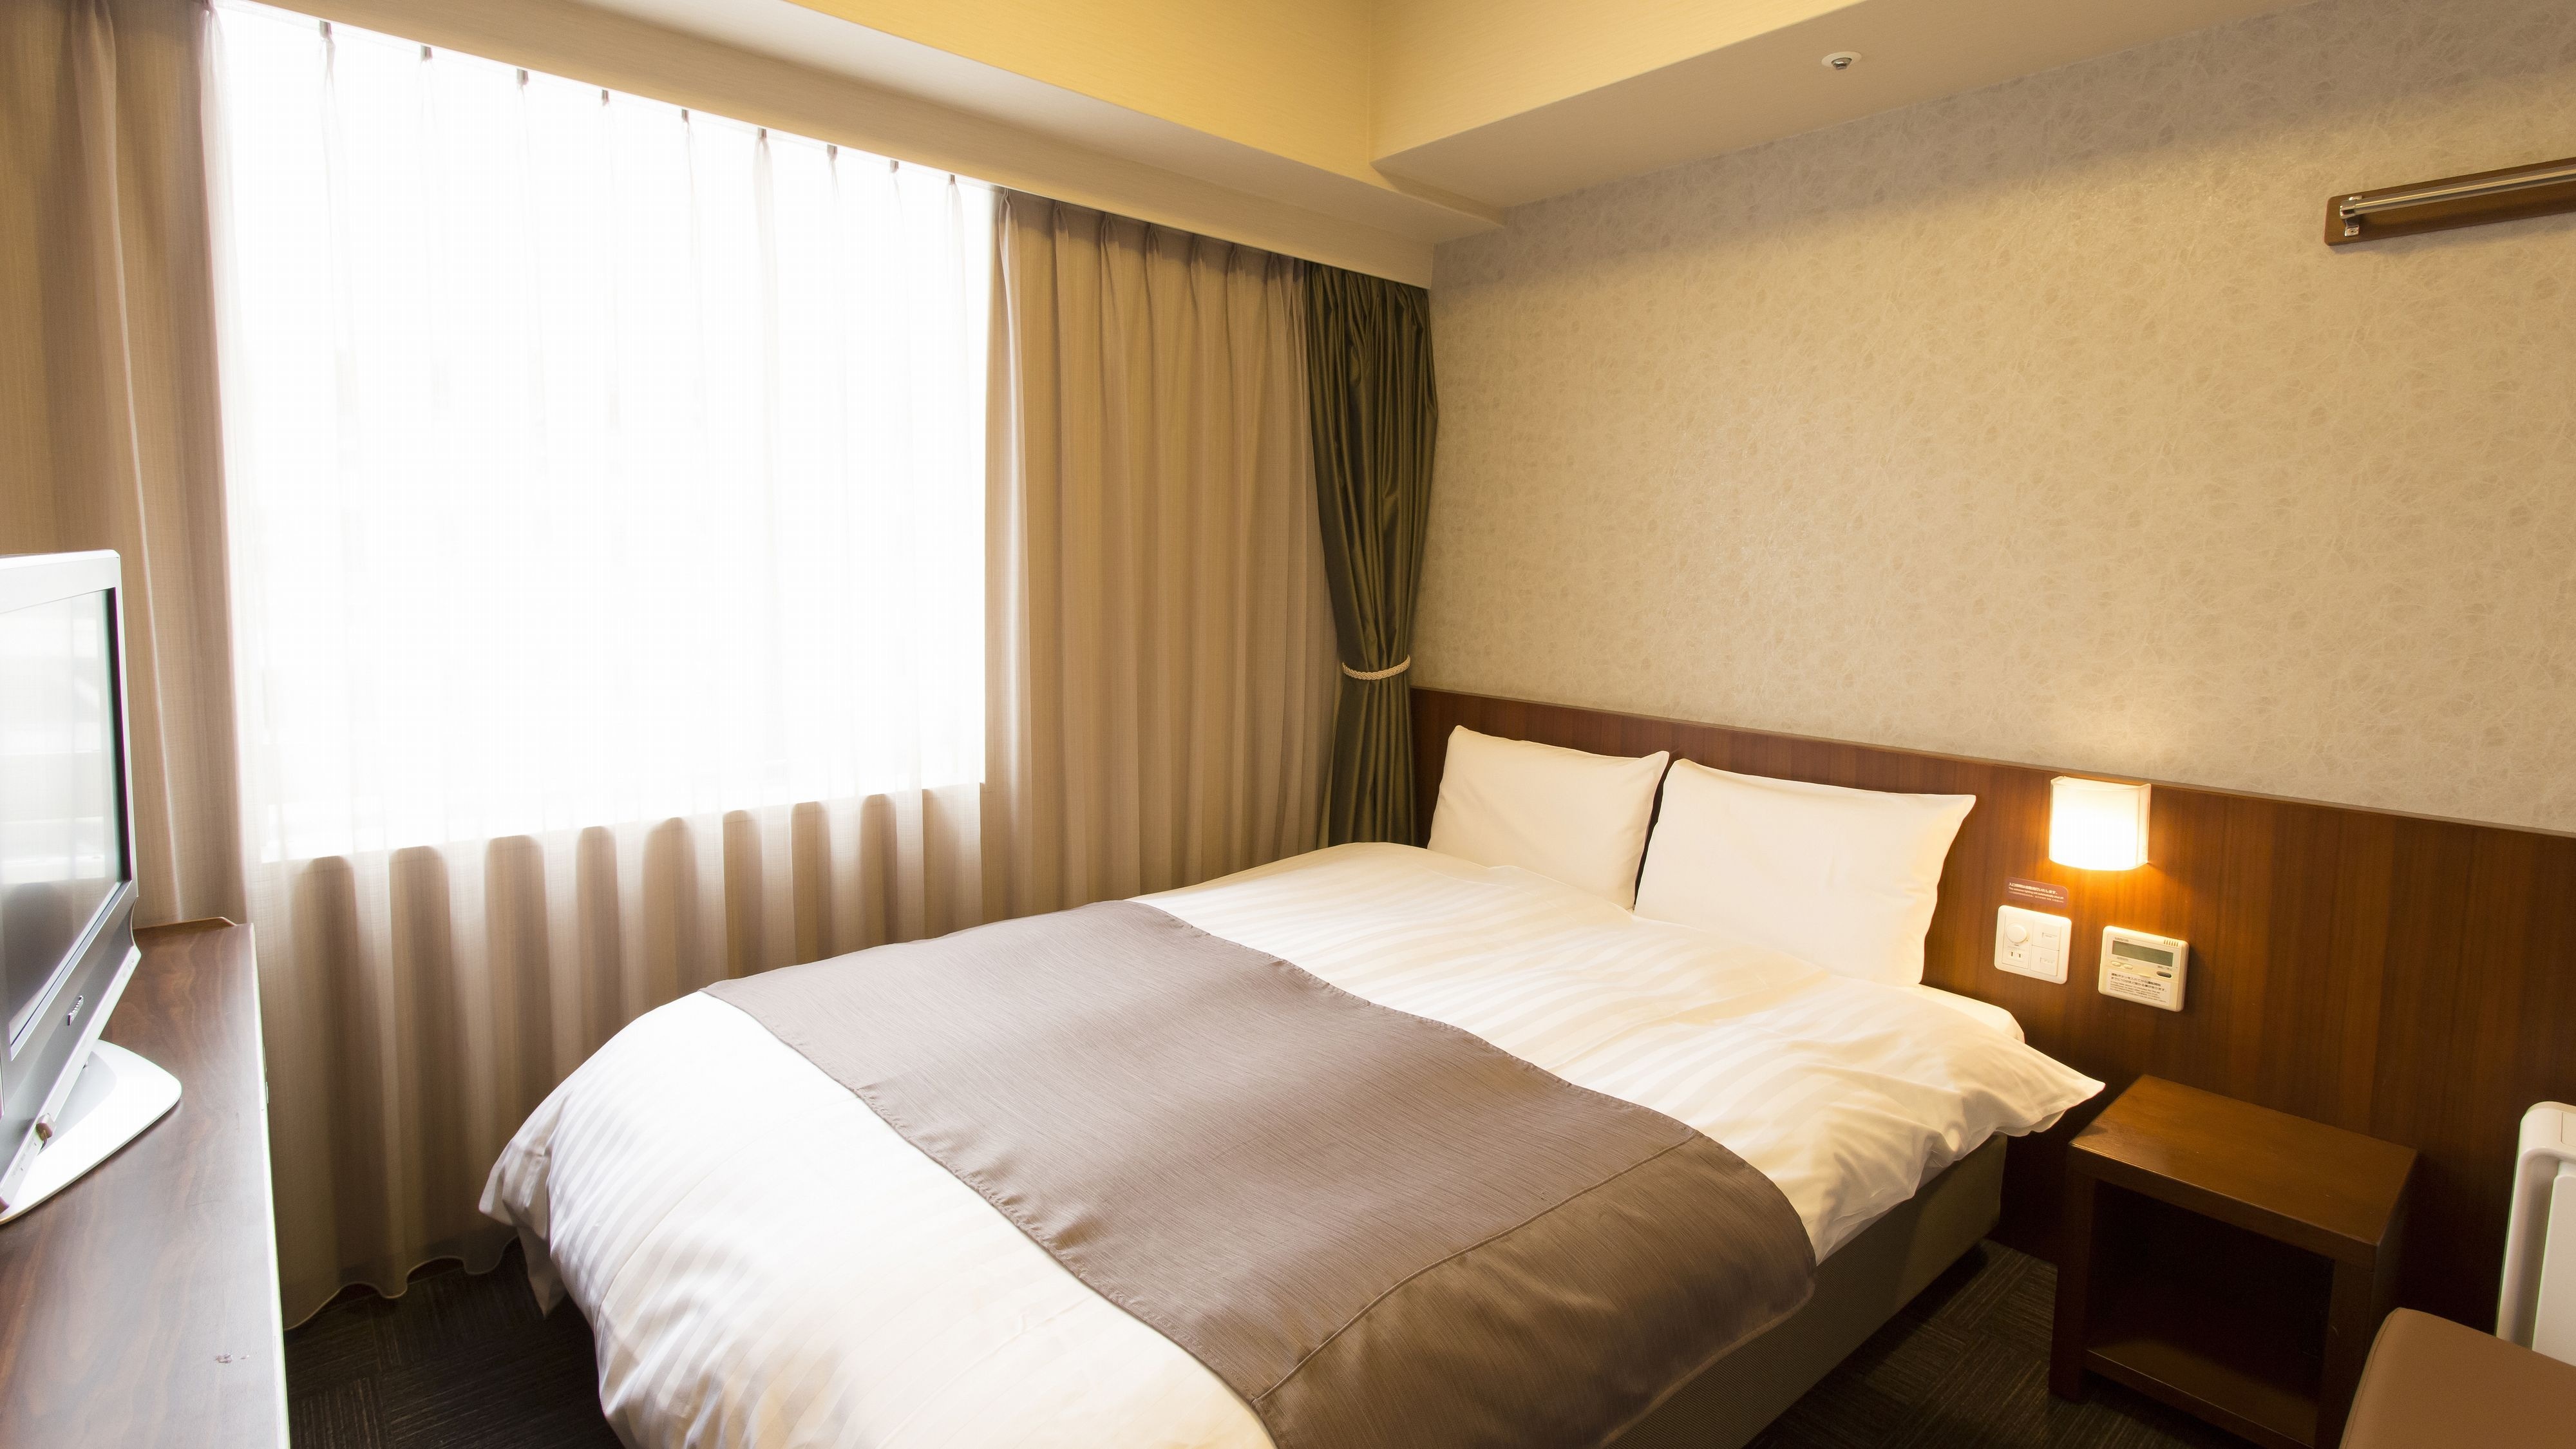 [Non-smoking / Smoking] Double room (1400 & times; 2050) 14.3-14.7㎡ ◇ Simmons bed complete